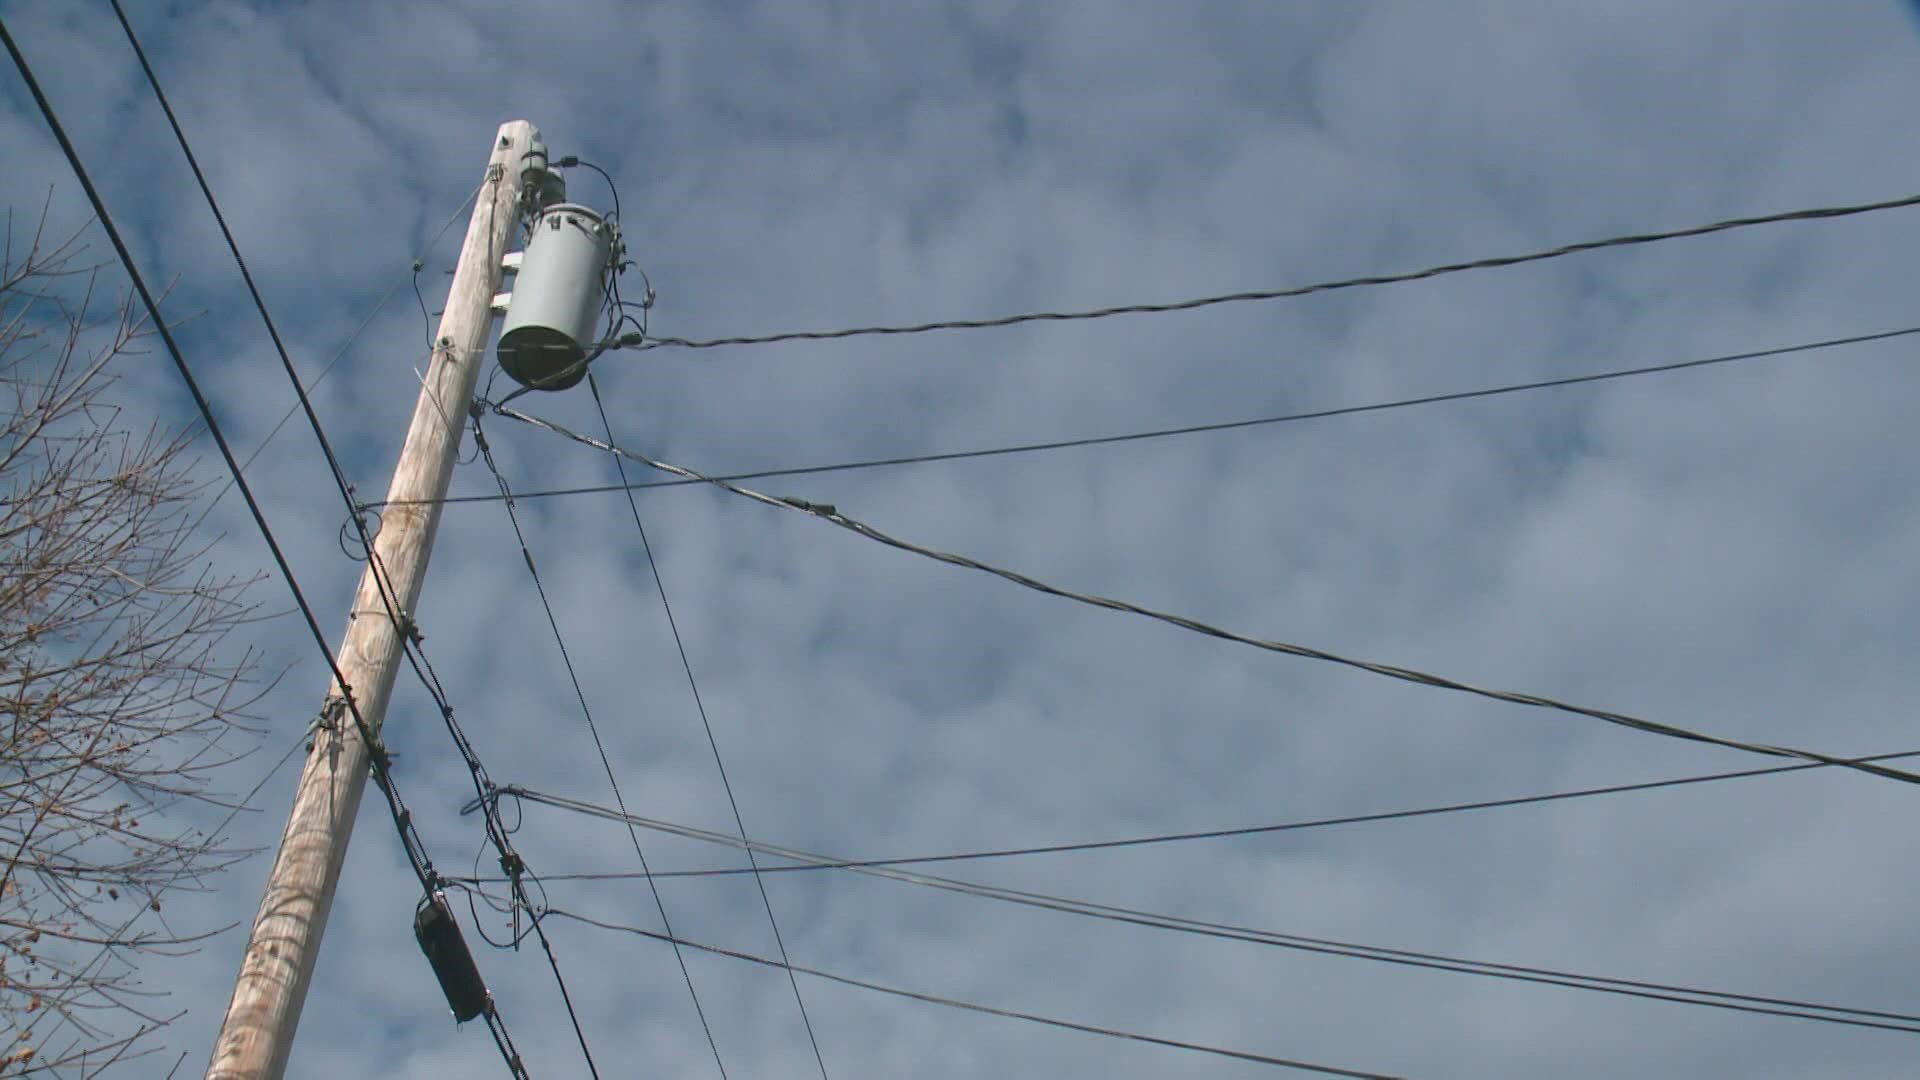 The Maine Public Utilities Commission announced in 2021 that Mainers would be paying between 83-89 percent more for electricity.